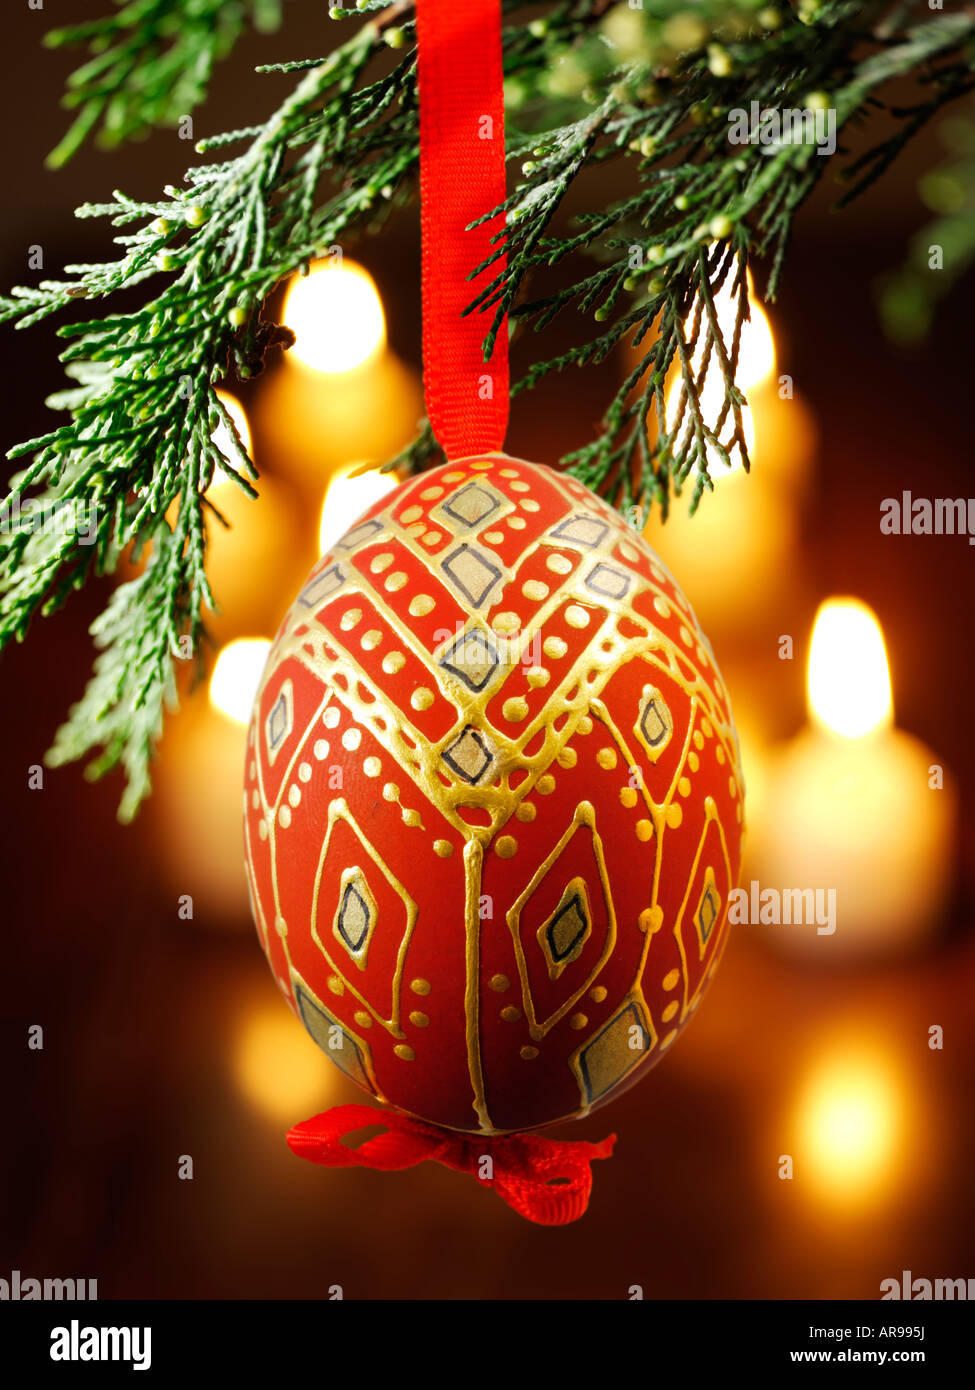 traditional  festive decorated Christmas bauble hanging on a Christmas tree with lights behind Stock Photo